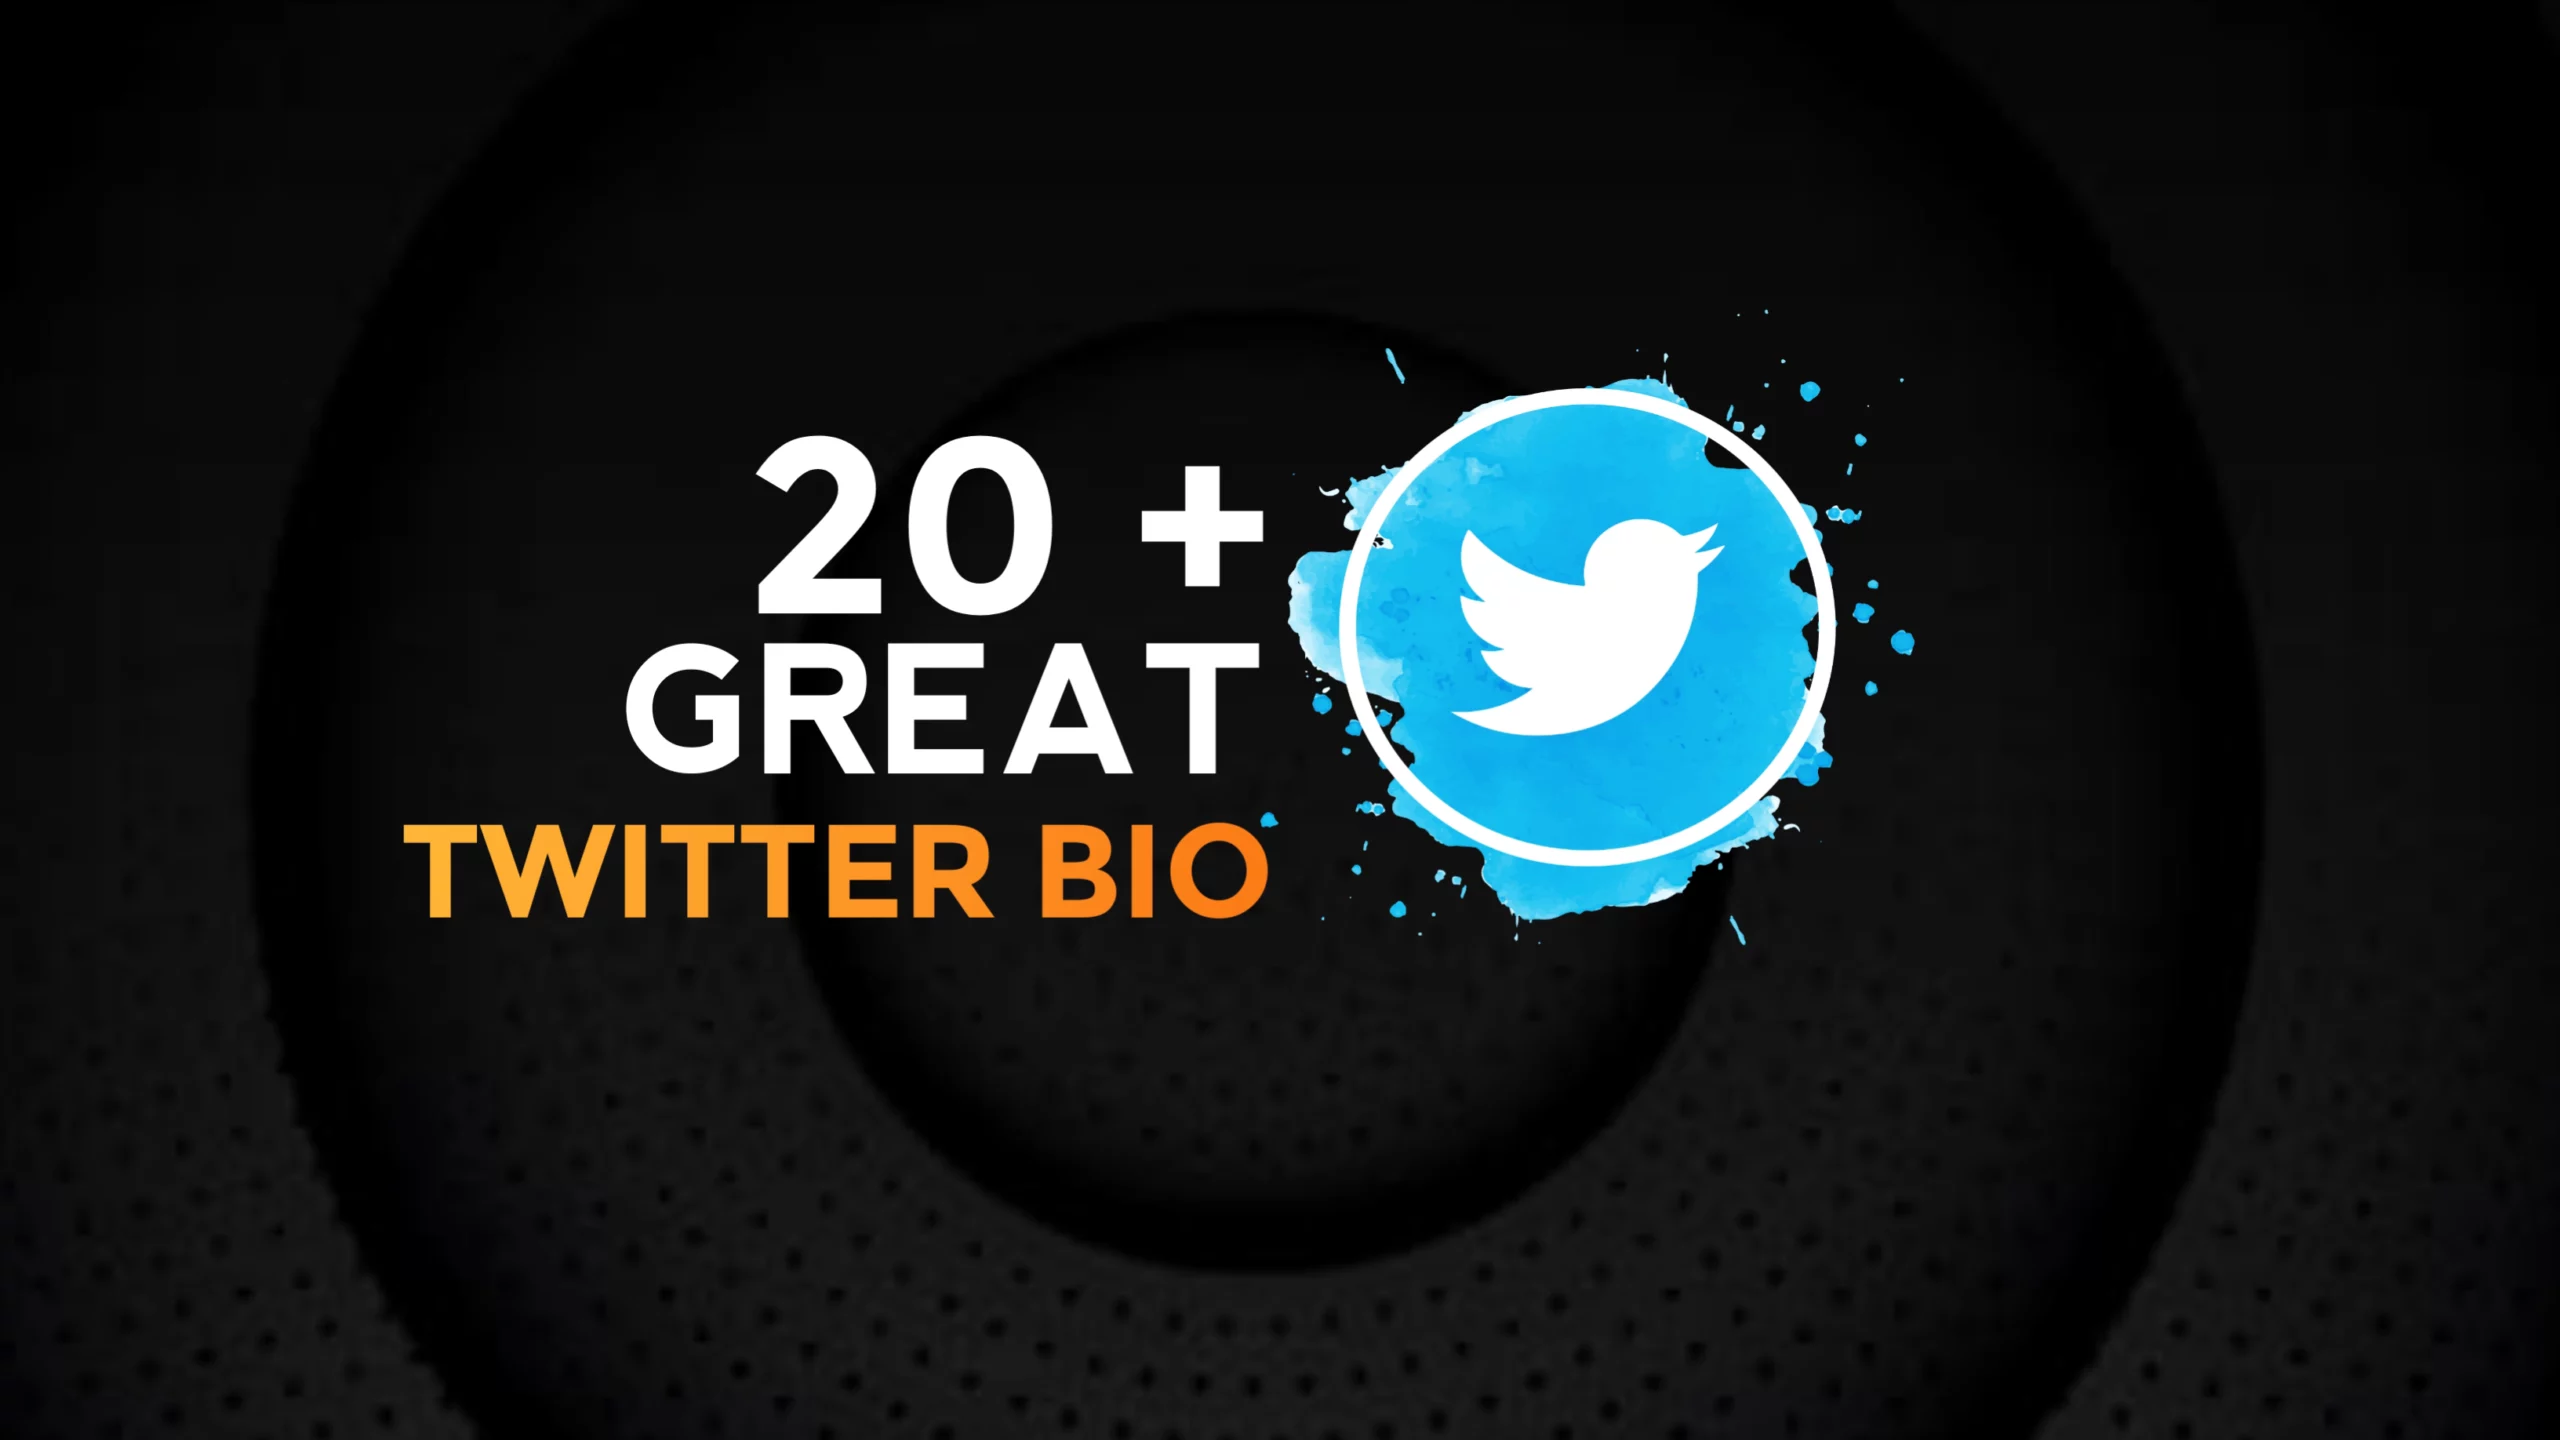 20+ Great Twitter Bio To Attract The Followers